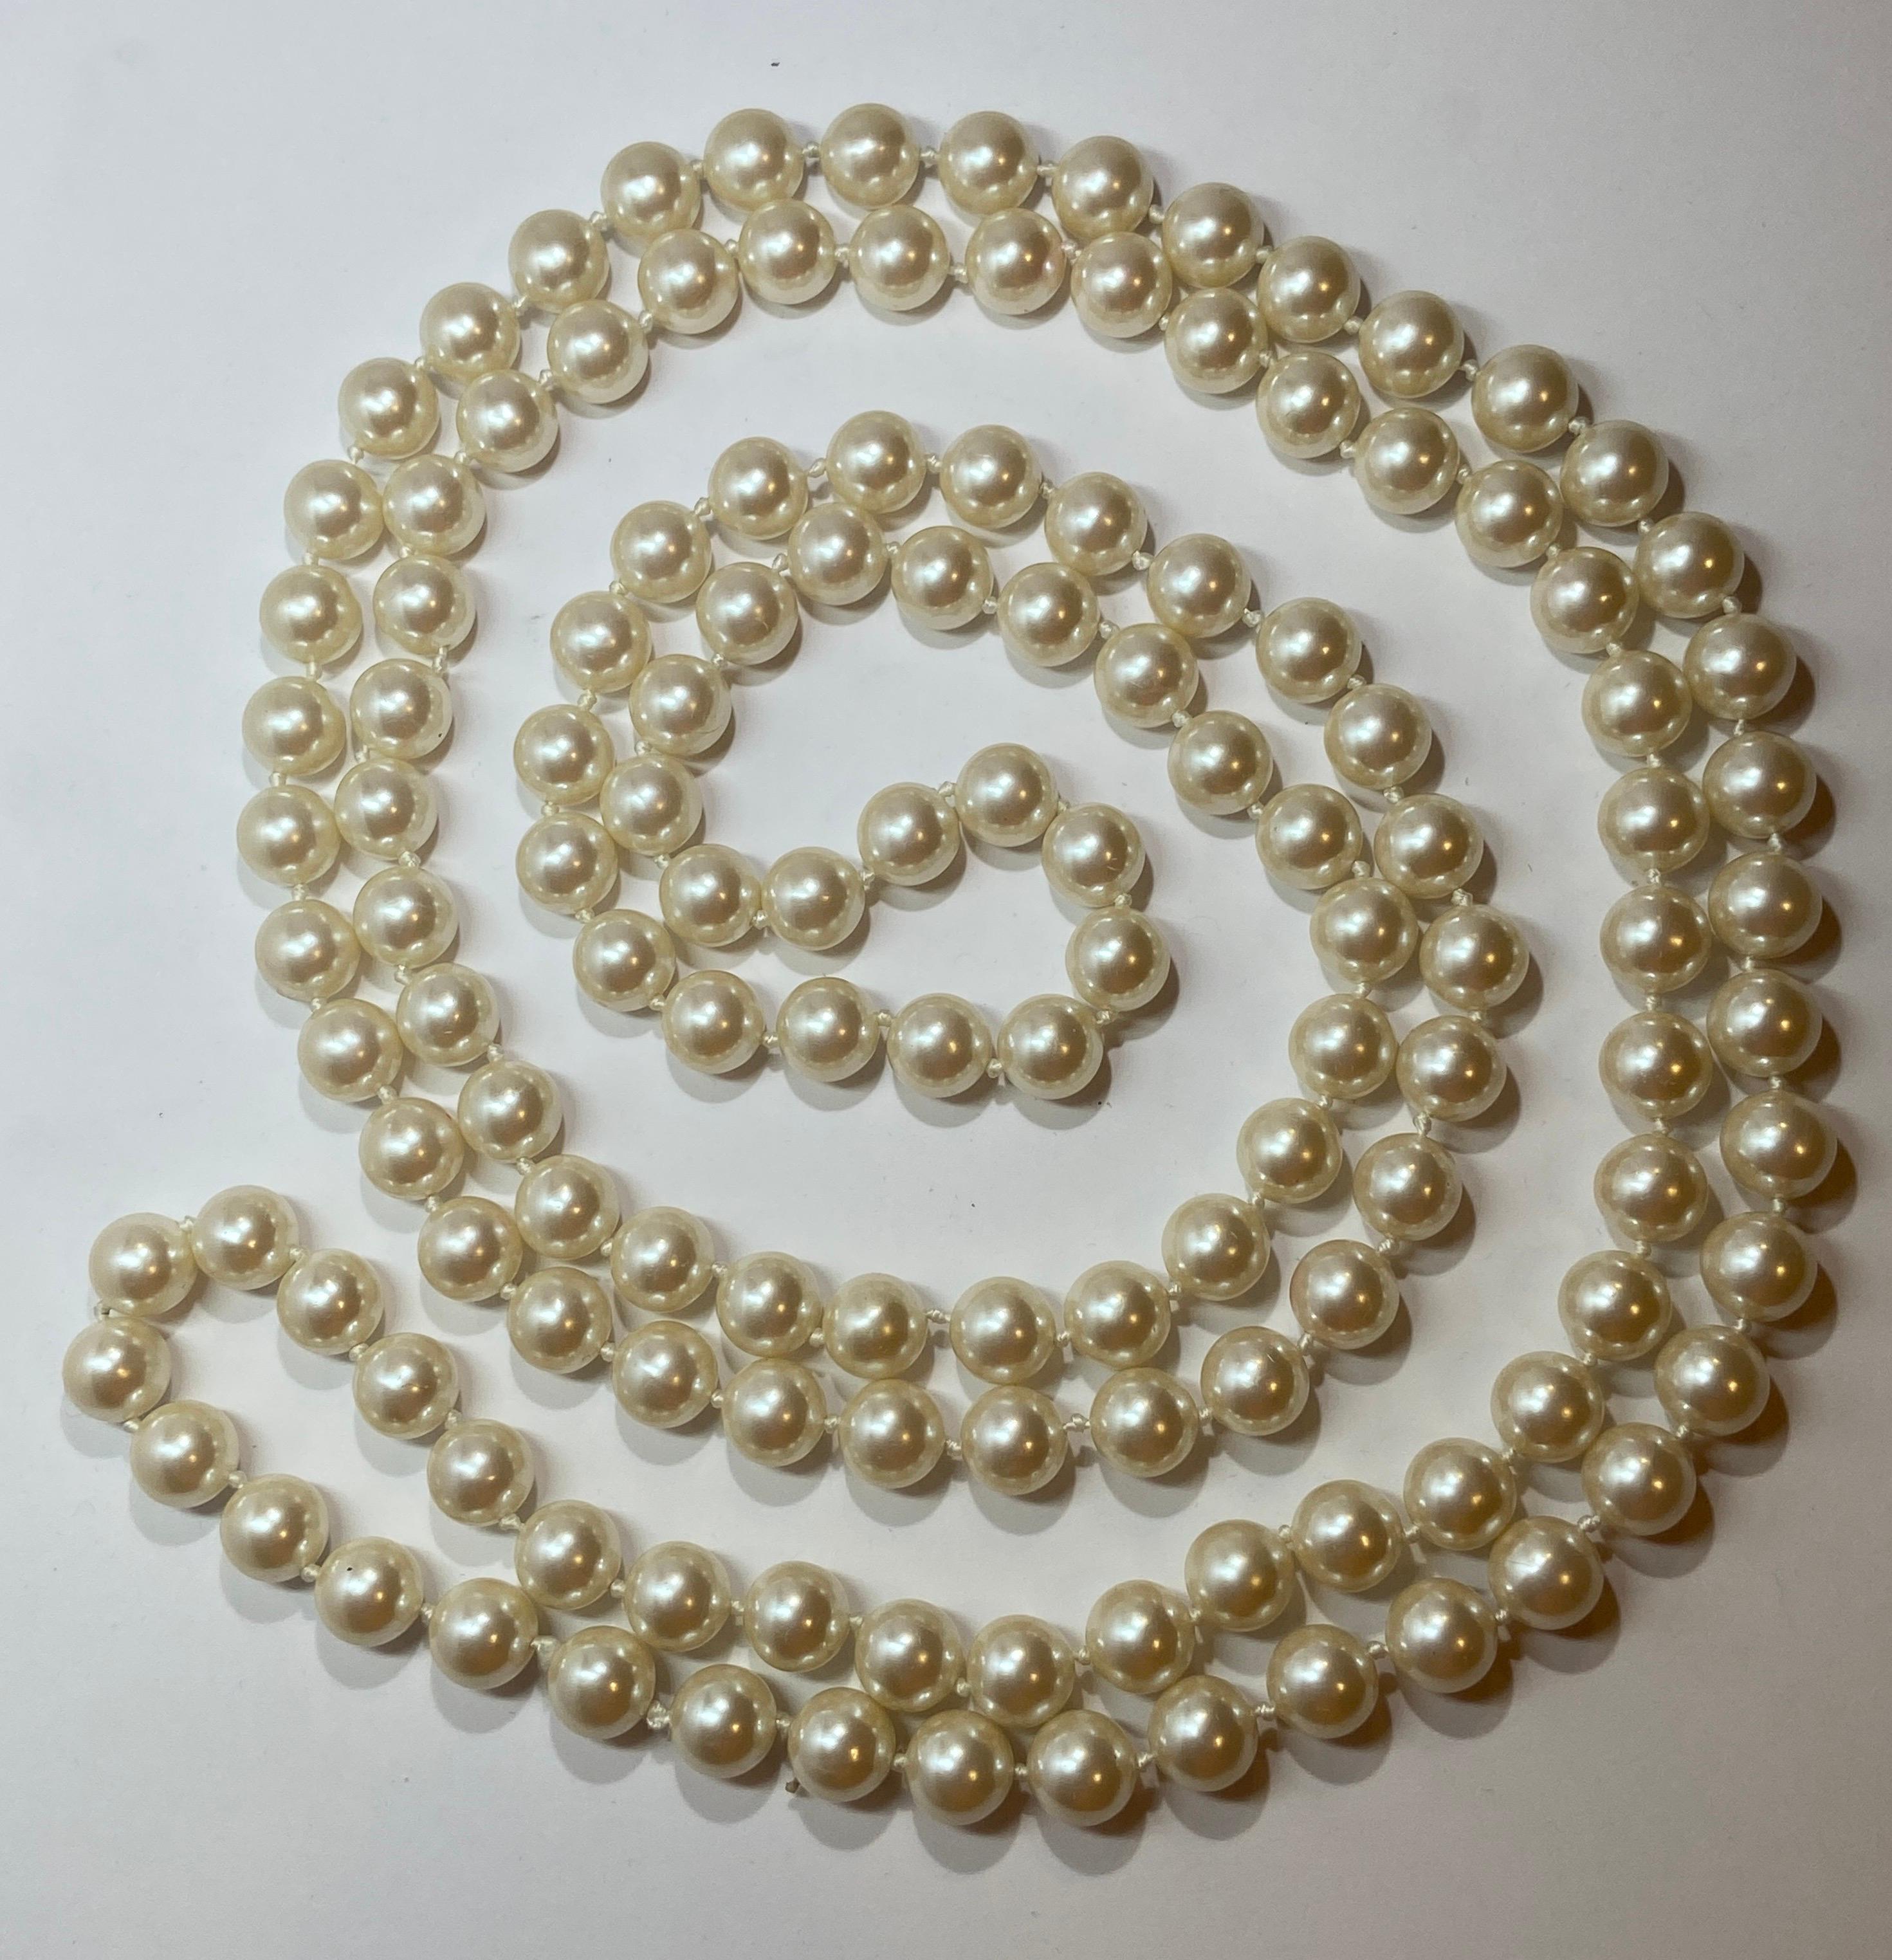 Women's or Men's Large Costume Extra-Long Hand-Knotted Chanel-Like Pearl Necklace For Sale